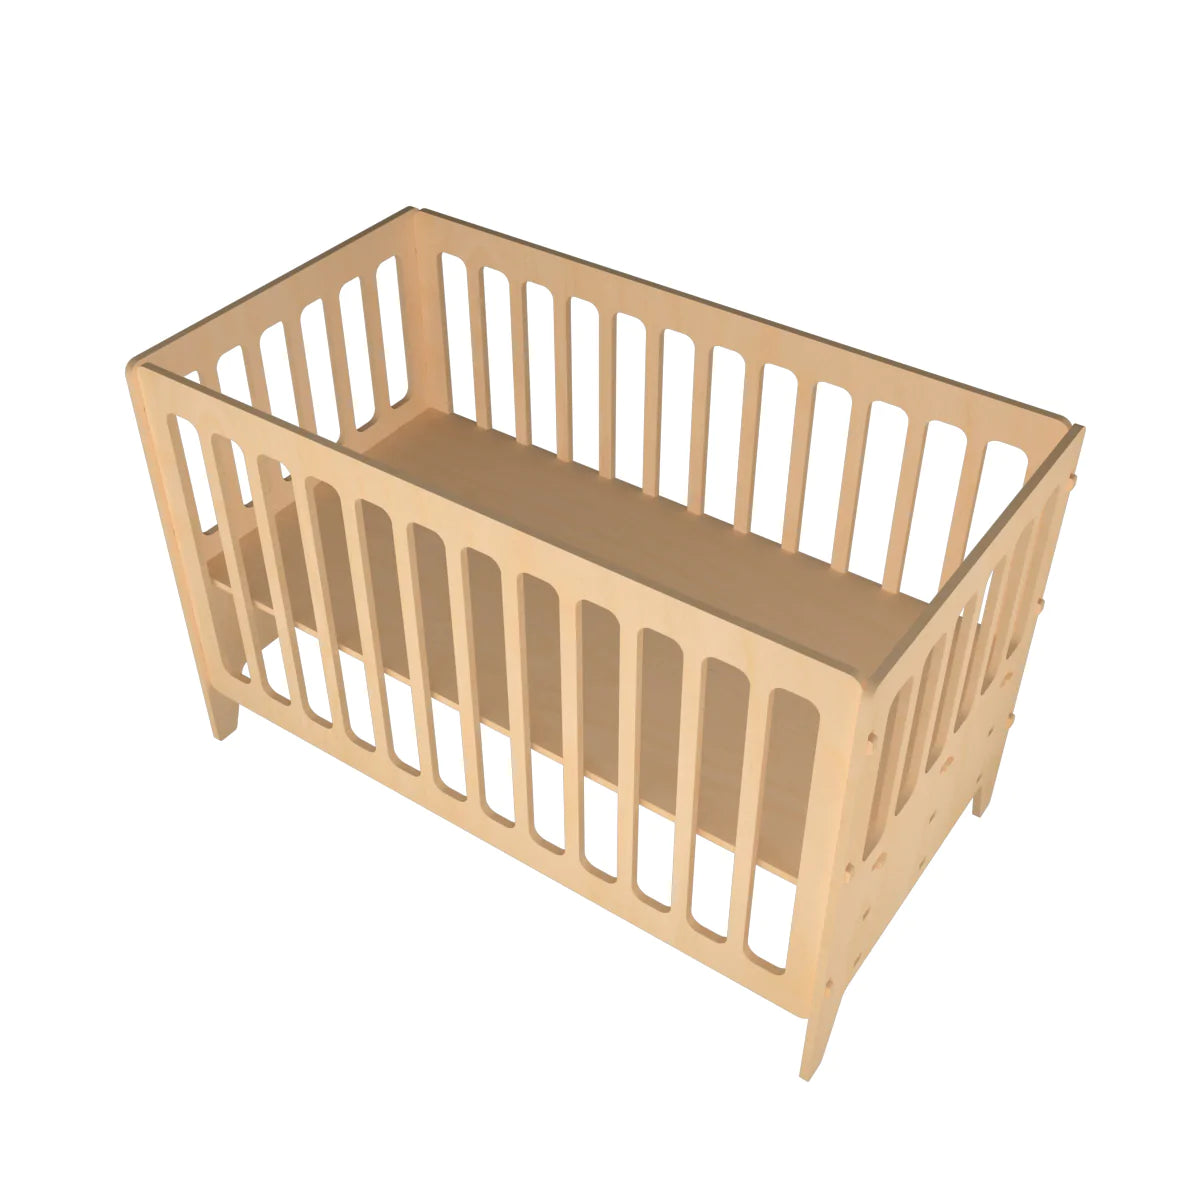 Buy Large Gold Cherry Wooden Crib - Natural - Upper View - SkilloToys.com